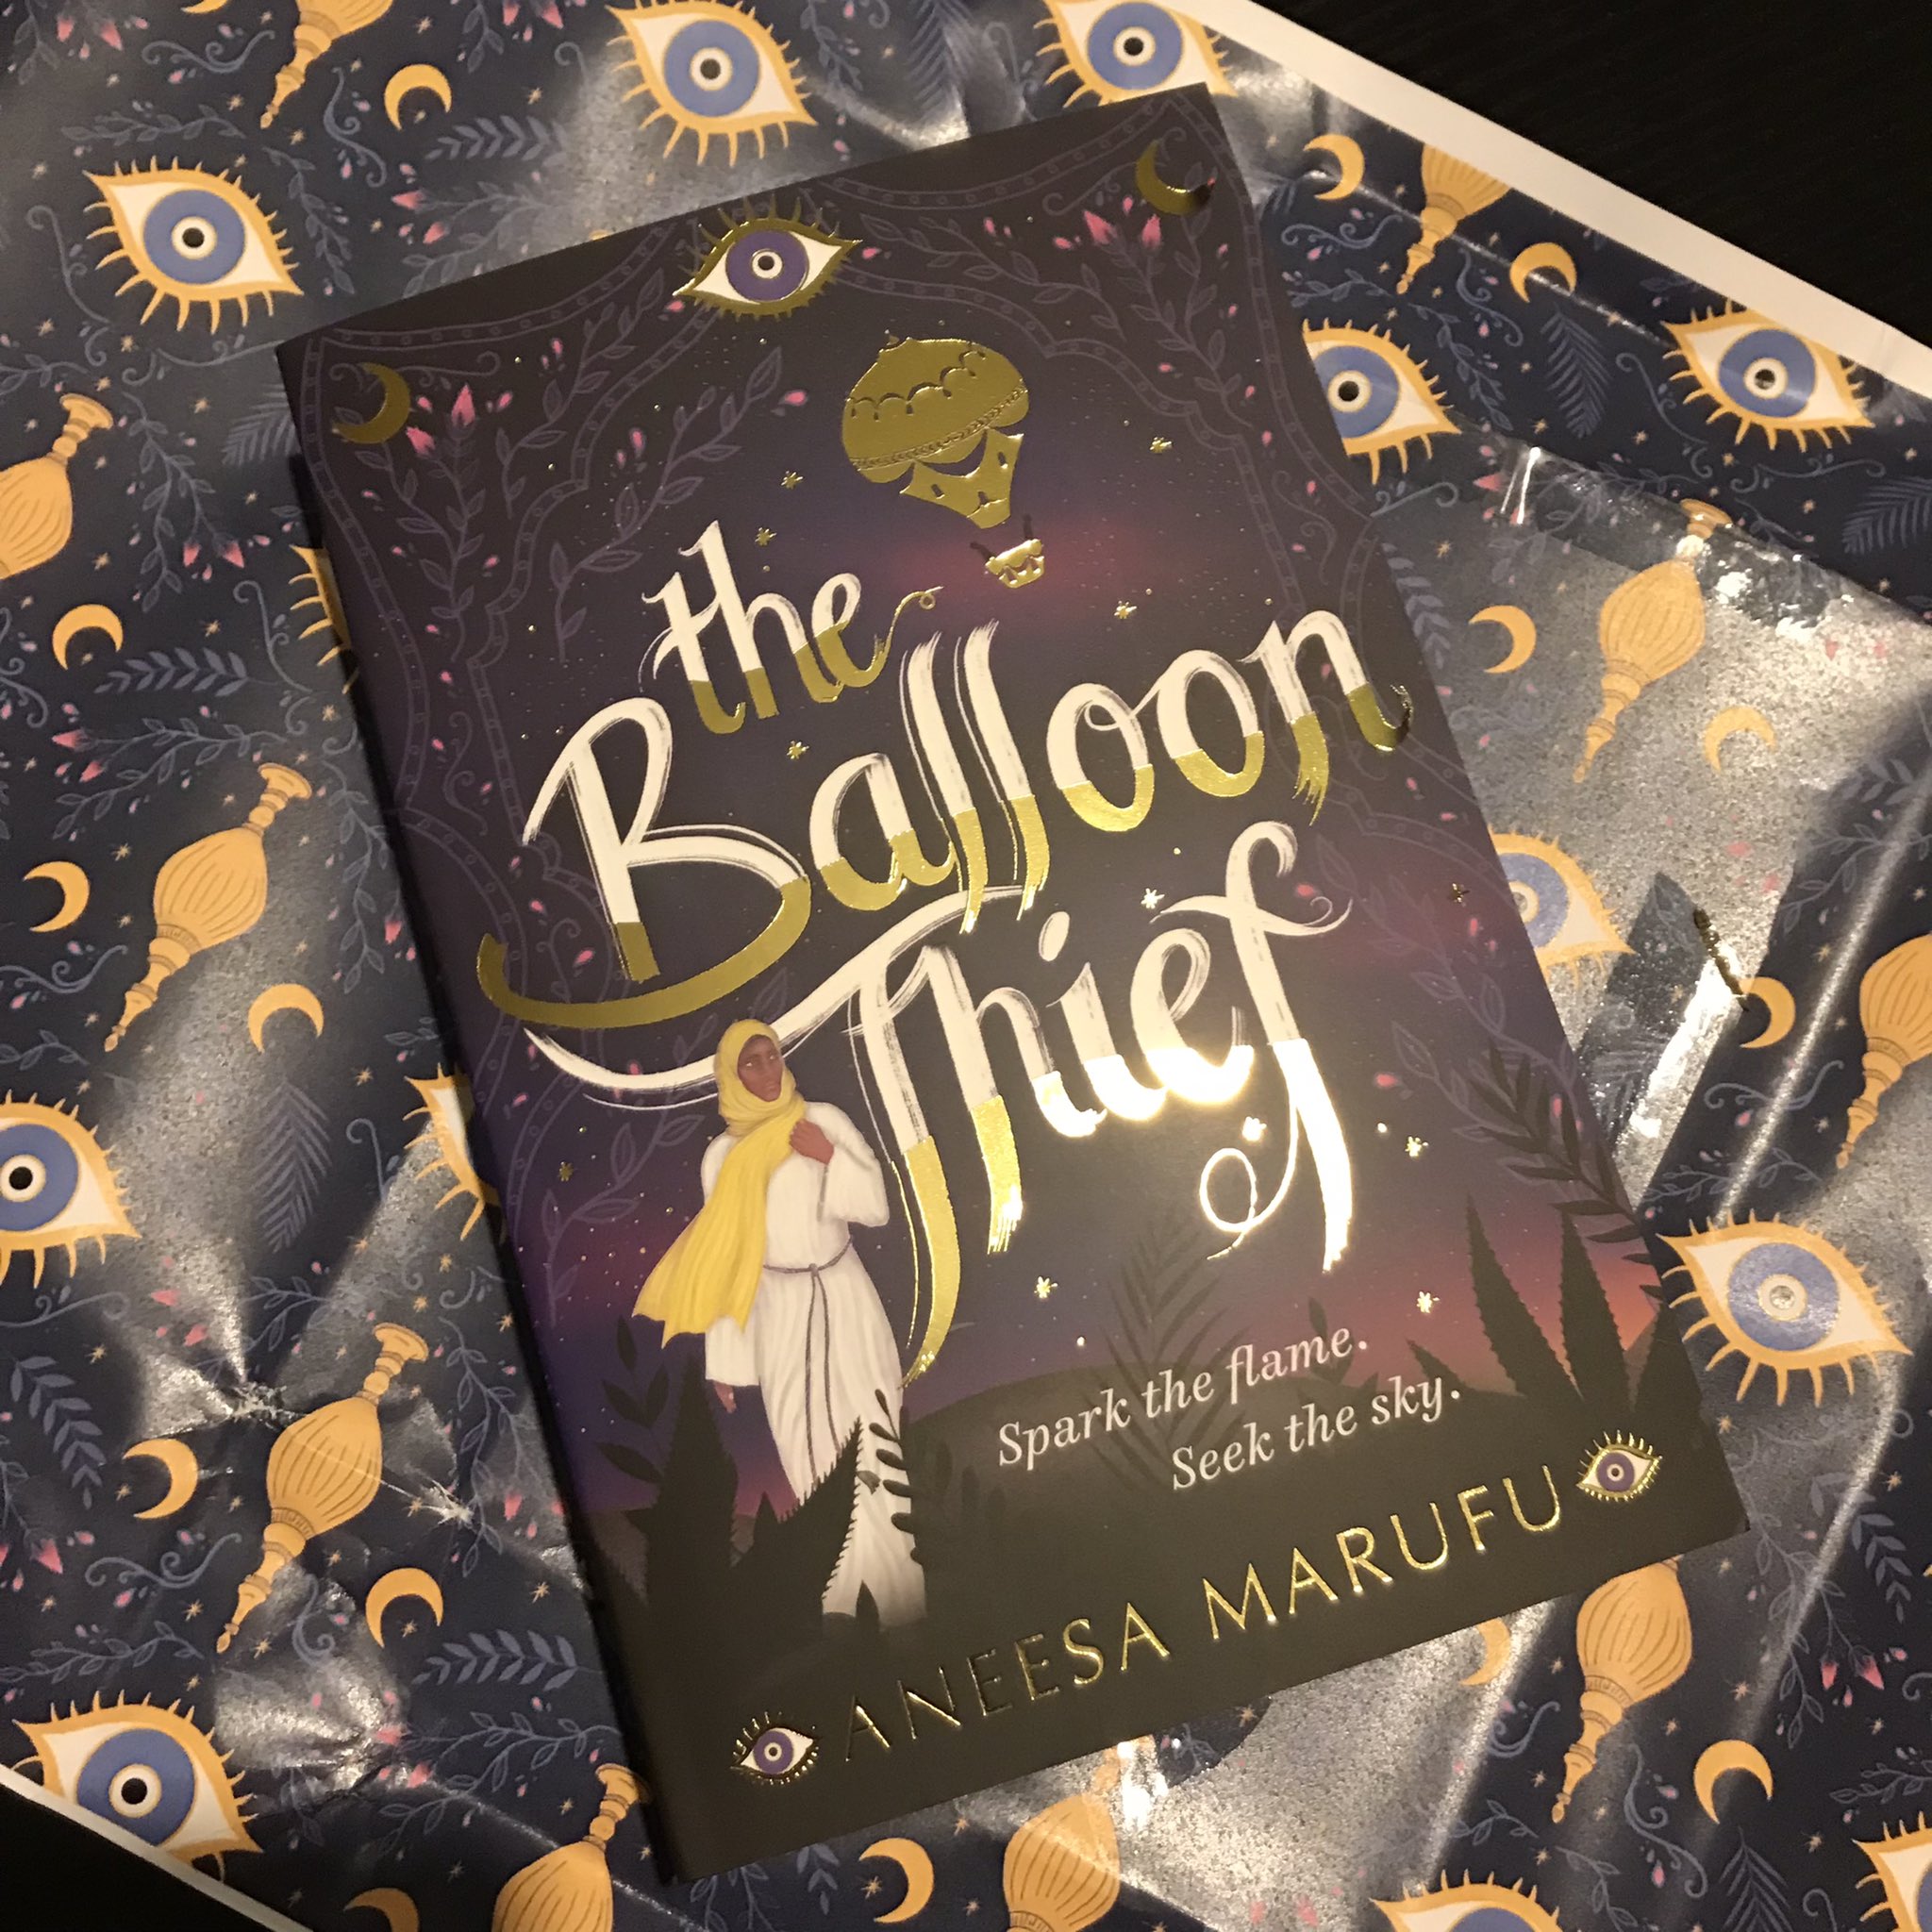 The Balloon Thief by Aneesa Marufu laying on flattened navy blue wrapping paper patterned with yellow and blue eyes and stylised urn with crescent moons repeated, on a black wooden table. The book is diagonal, top left to bottom right.